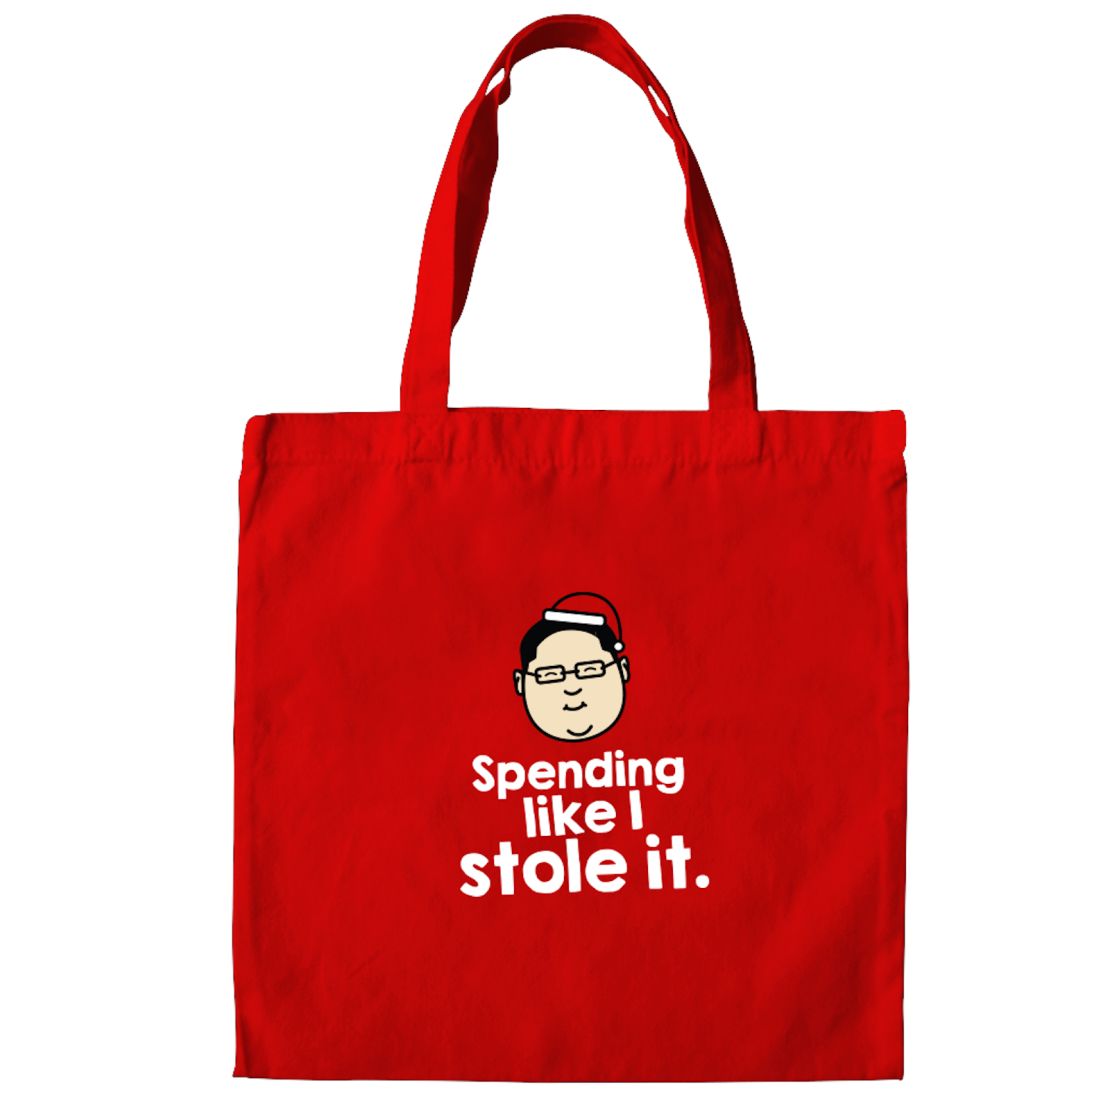 Detail of a tote bag, showing a caricature of Jho Low, the on-the-run financier accused of embezzling billions of dollars from Malaysia's sovereign wealth fund.